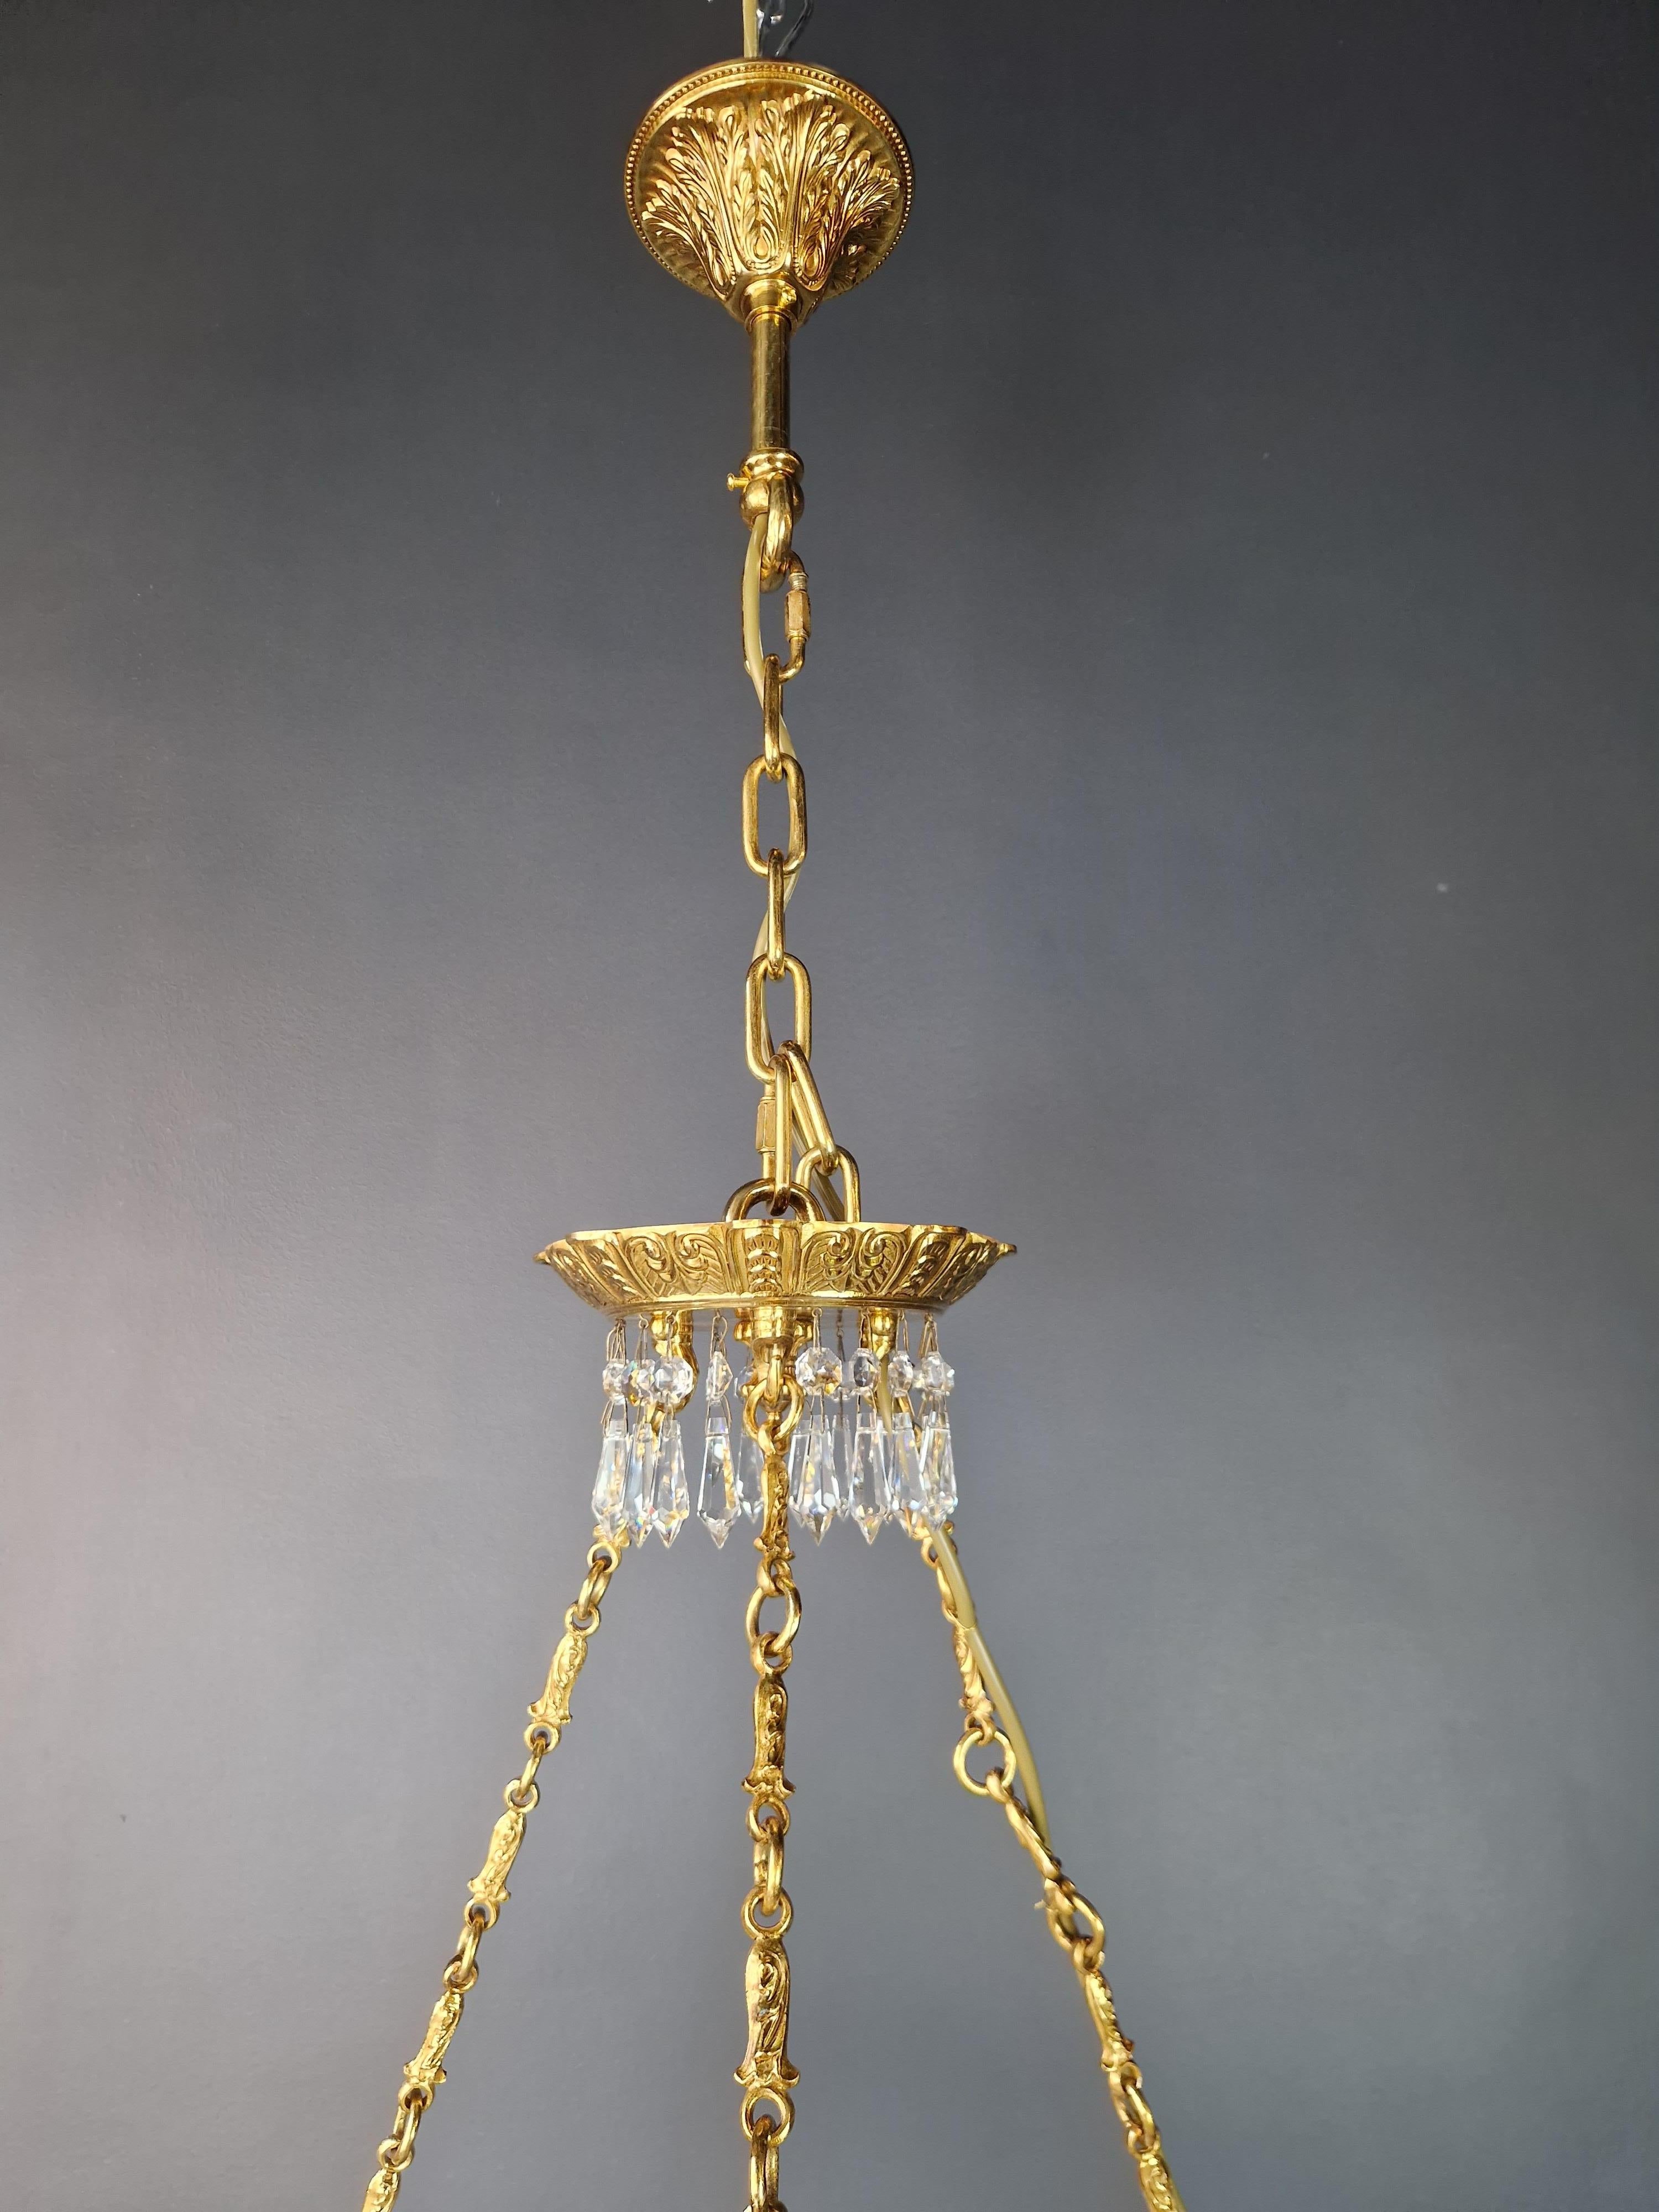 Brass Basket Classical Chandelier Crystal Lustre Lamp Antique Gold In New Condition For Sale In Berlin, DE